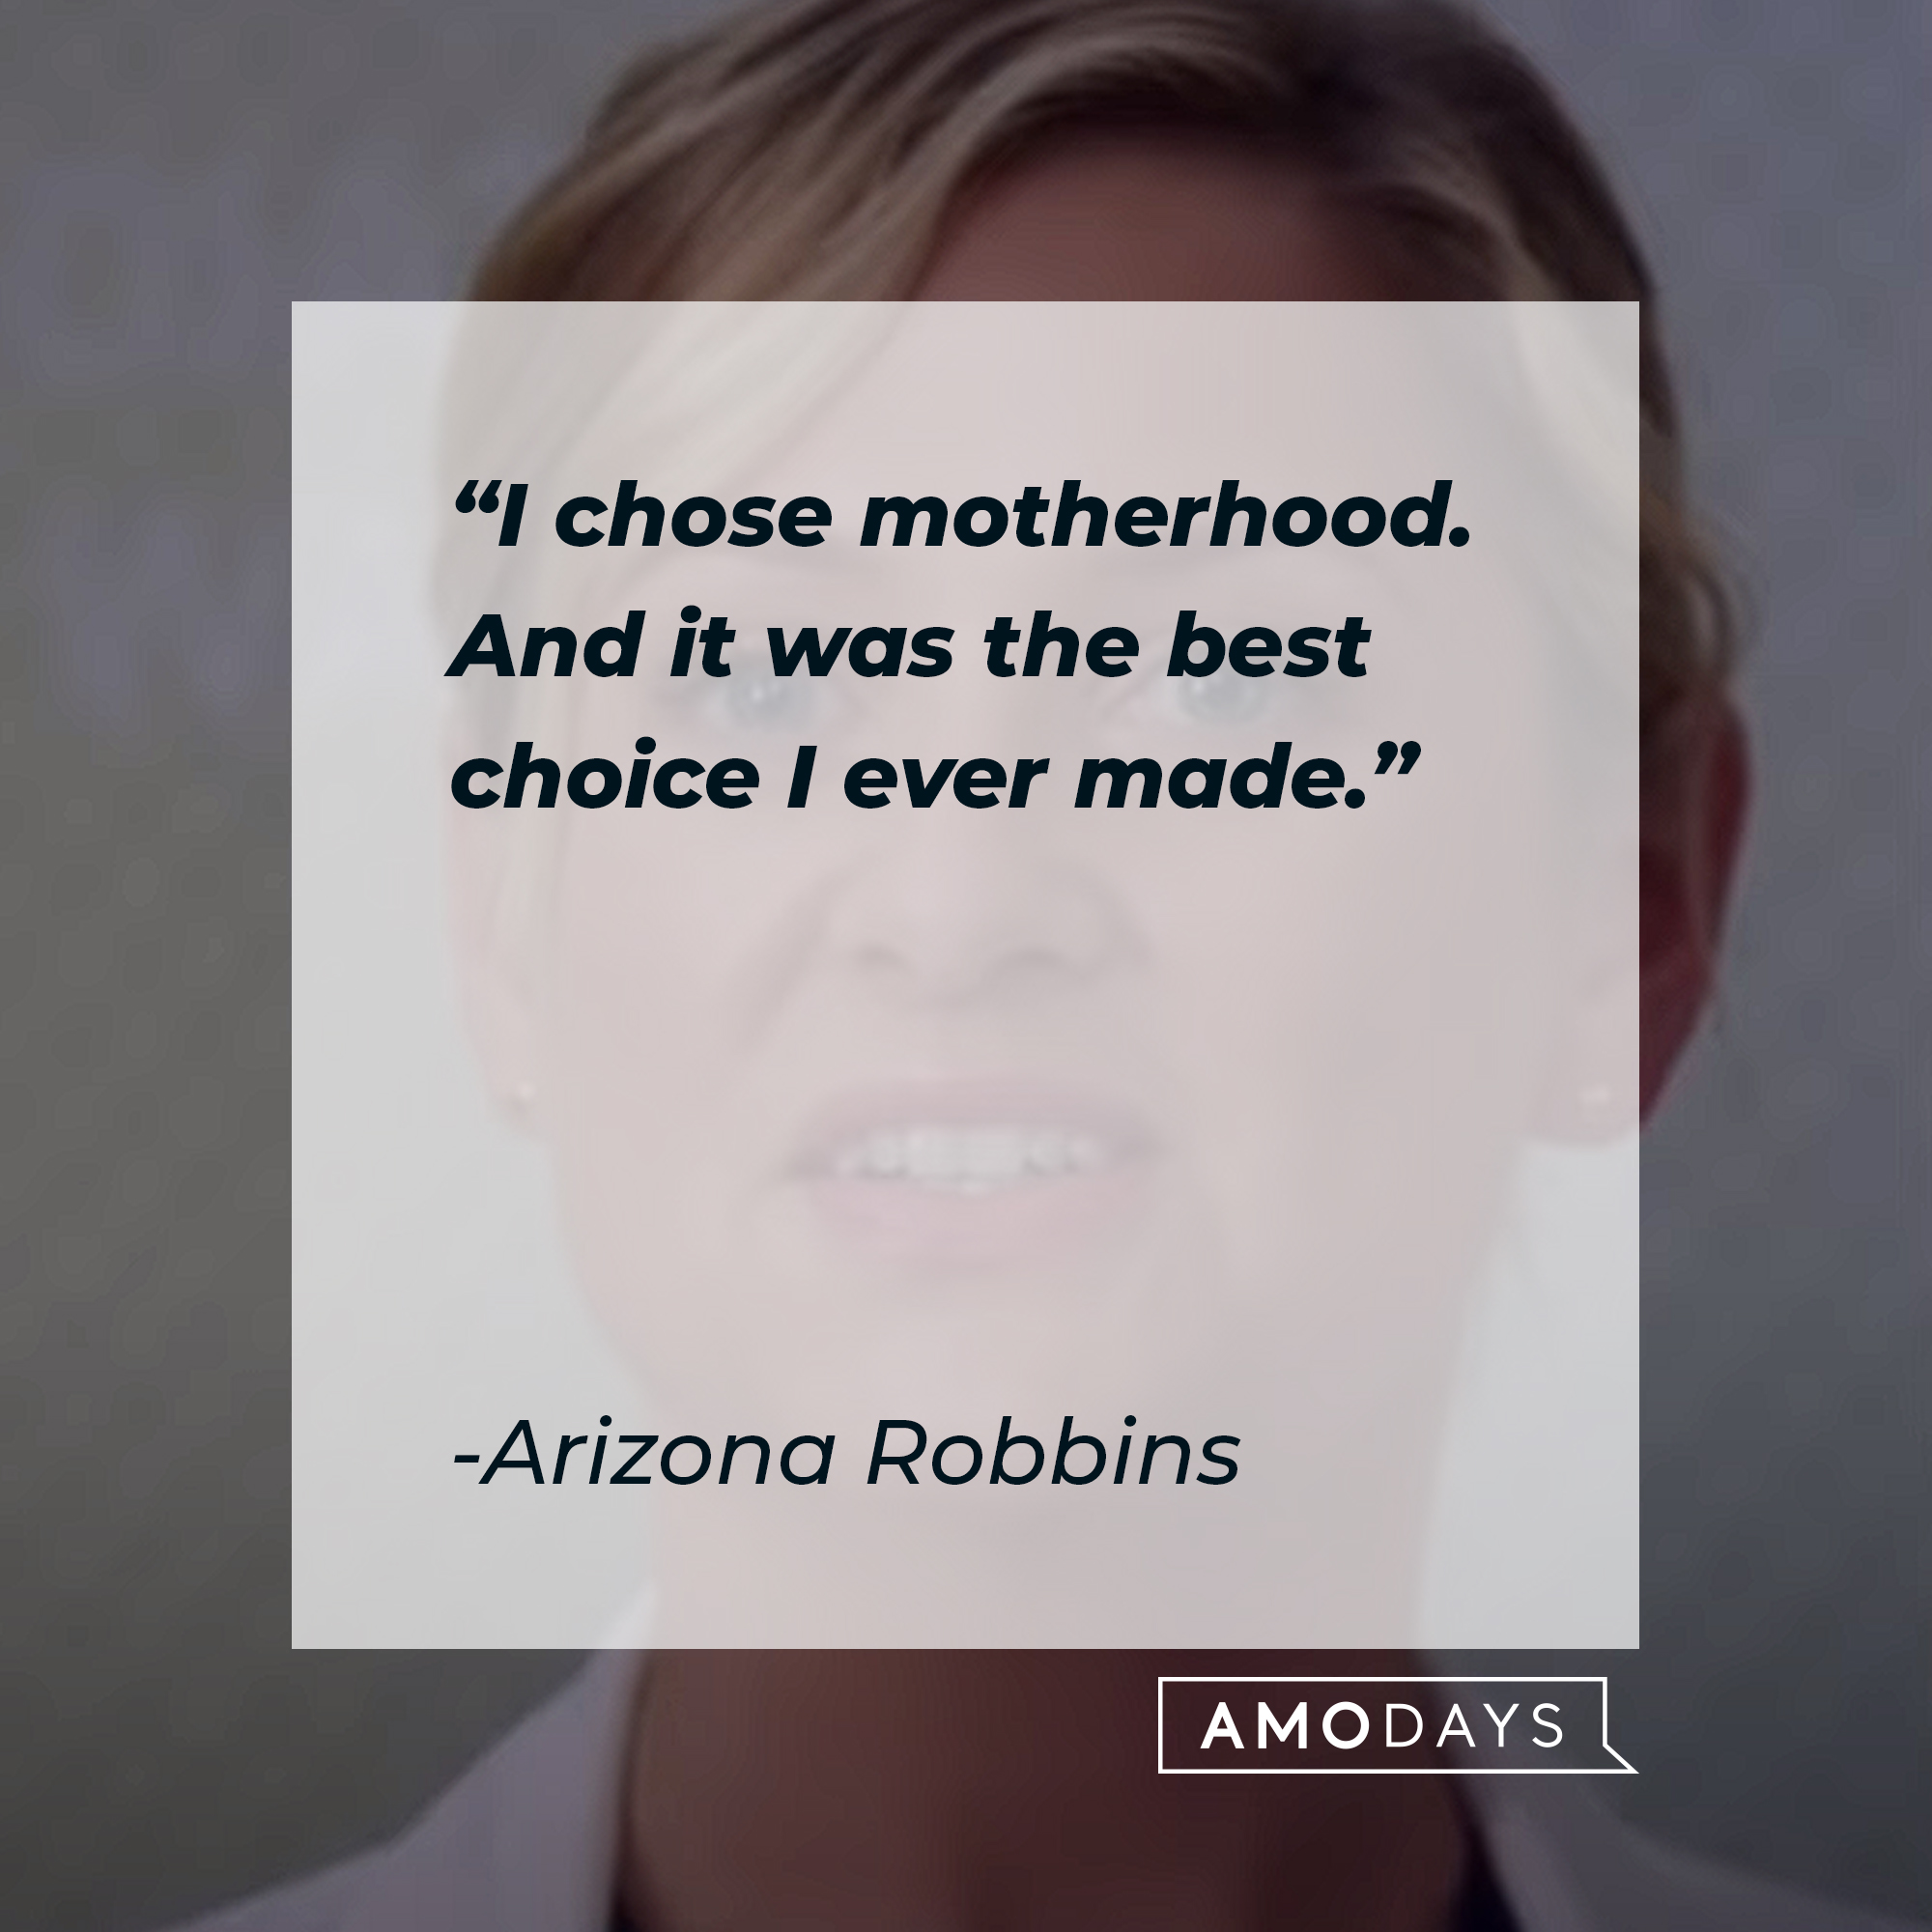 A picture of Arizona Robbins with her quote: “I chose motherhood. And it was the best choice I ever made." | Image: AmoDays